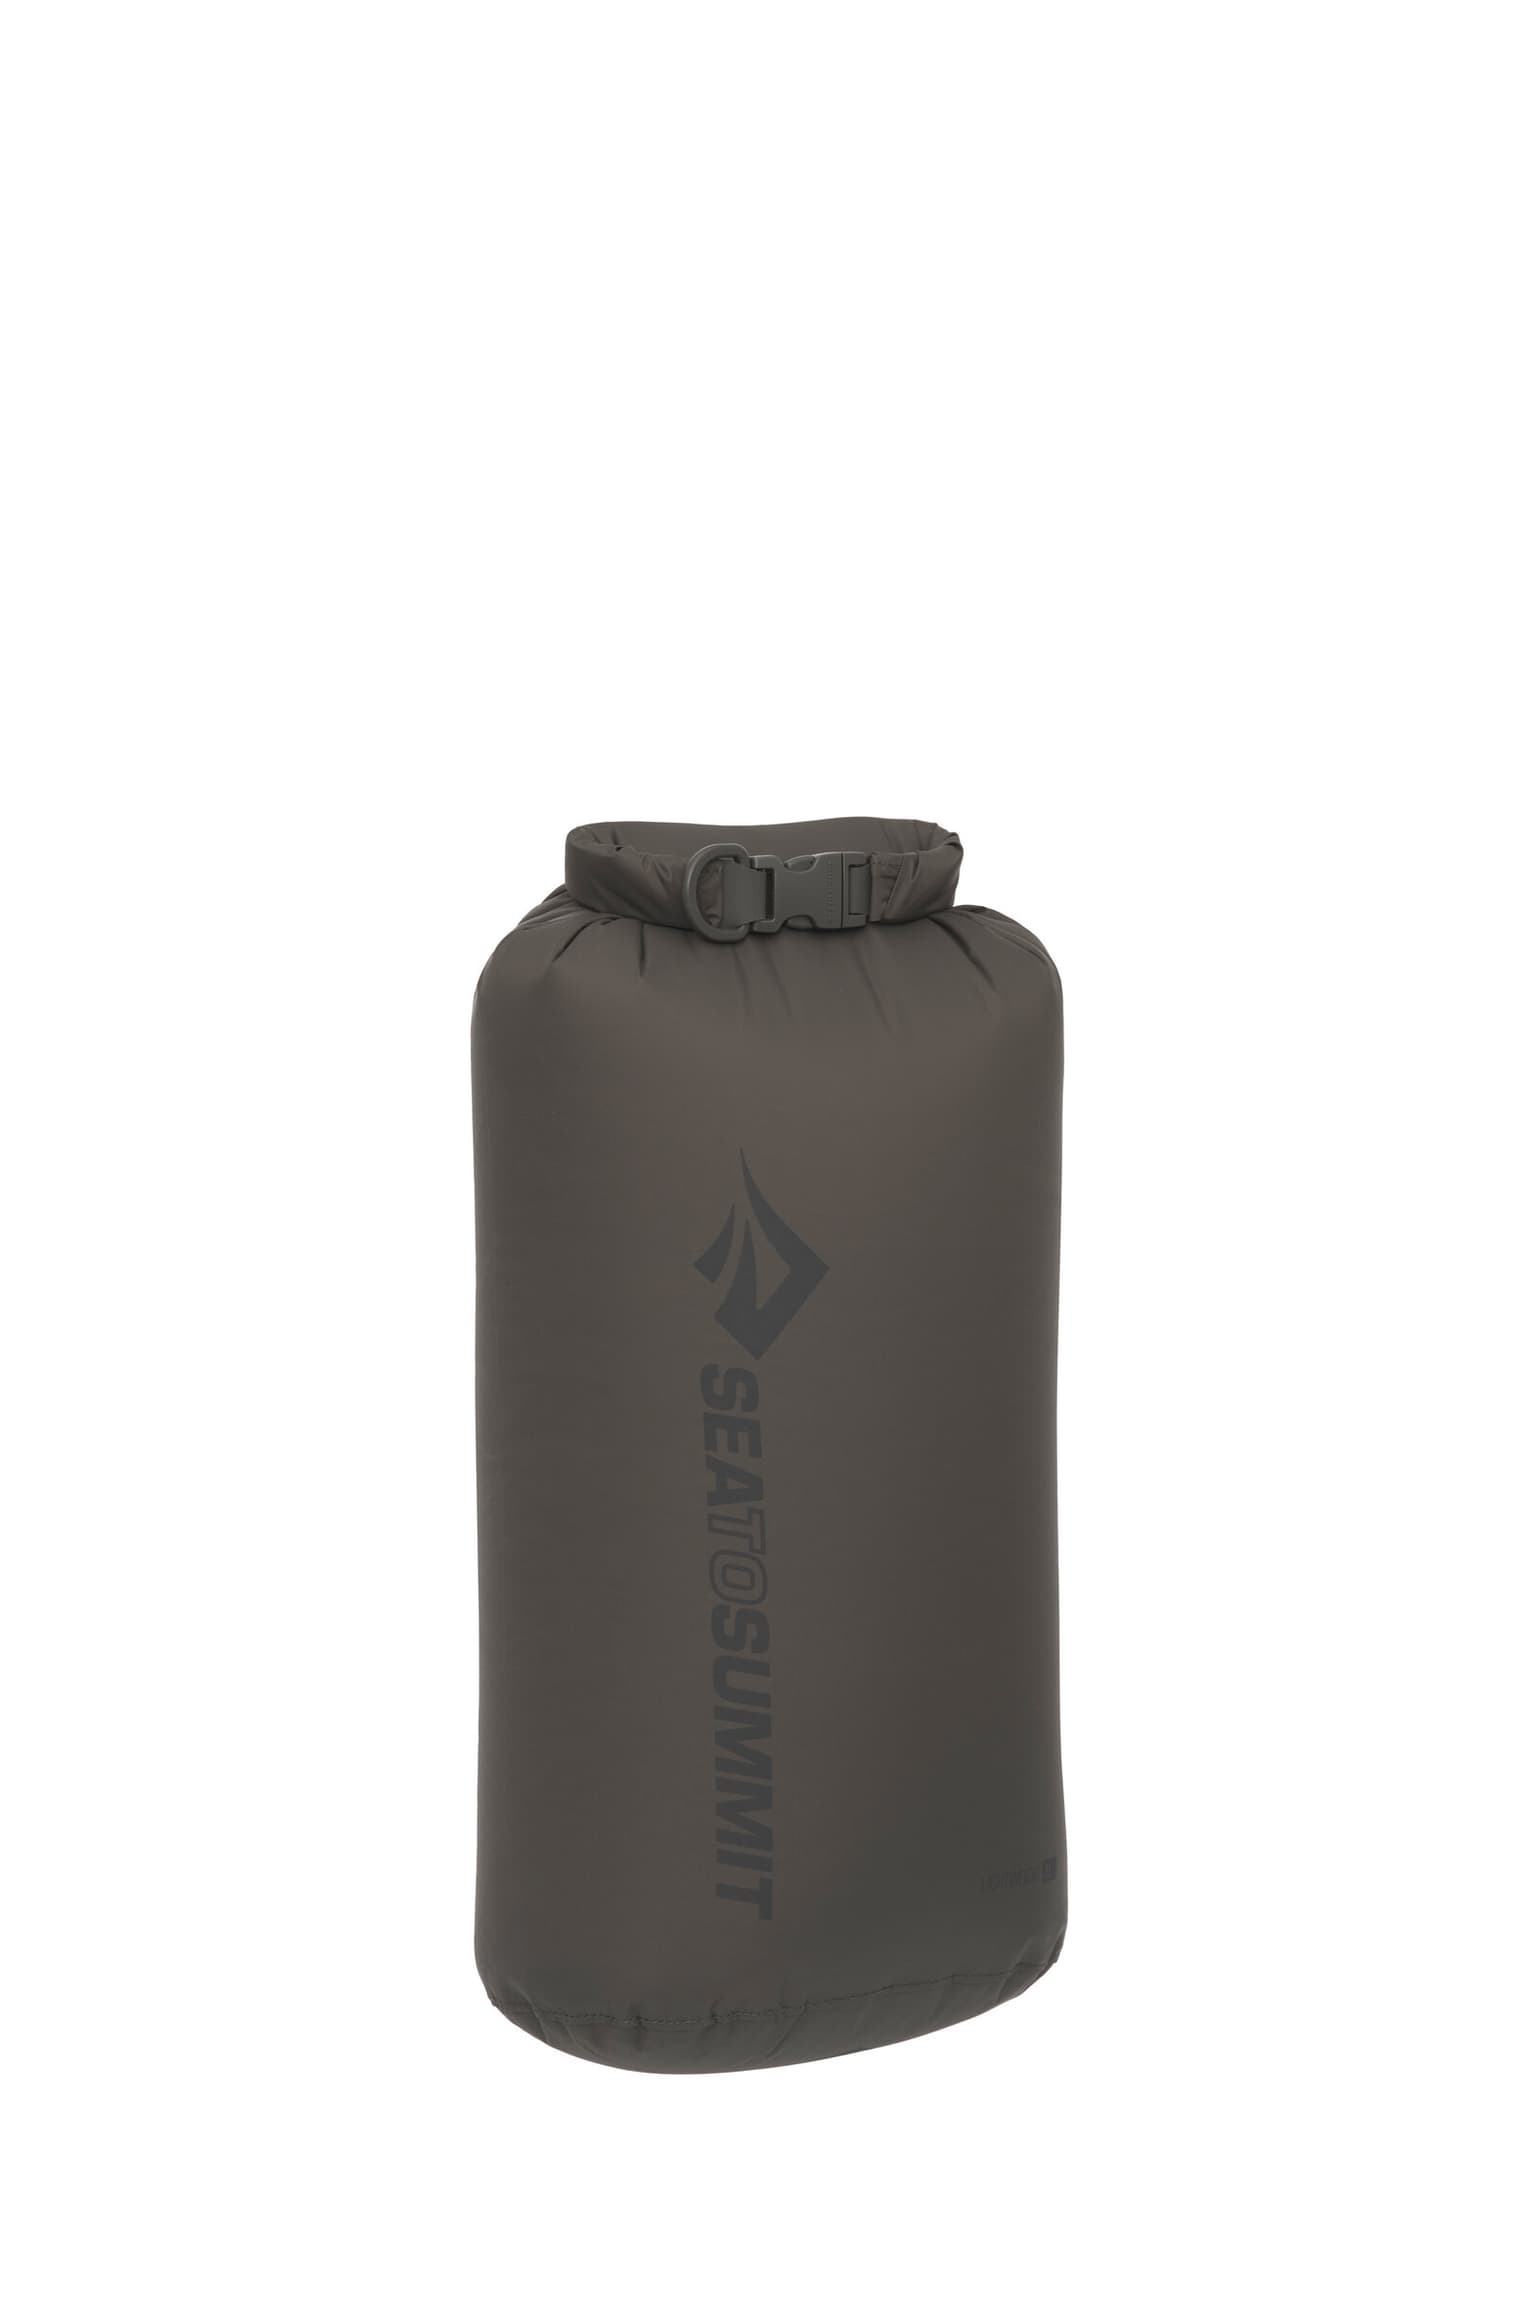 Sea To Summit Sea To Summit Lightweight Dry Bag 8L Dry Bag gris-fonce 1